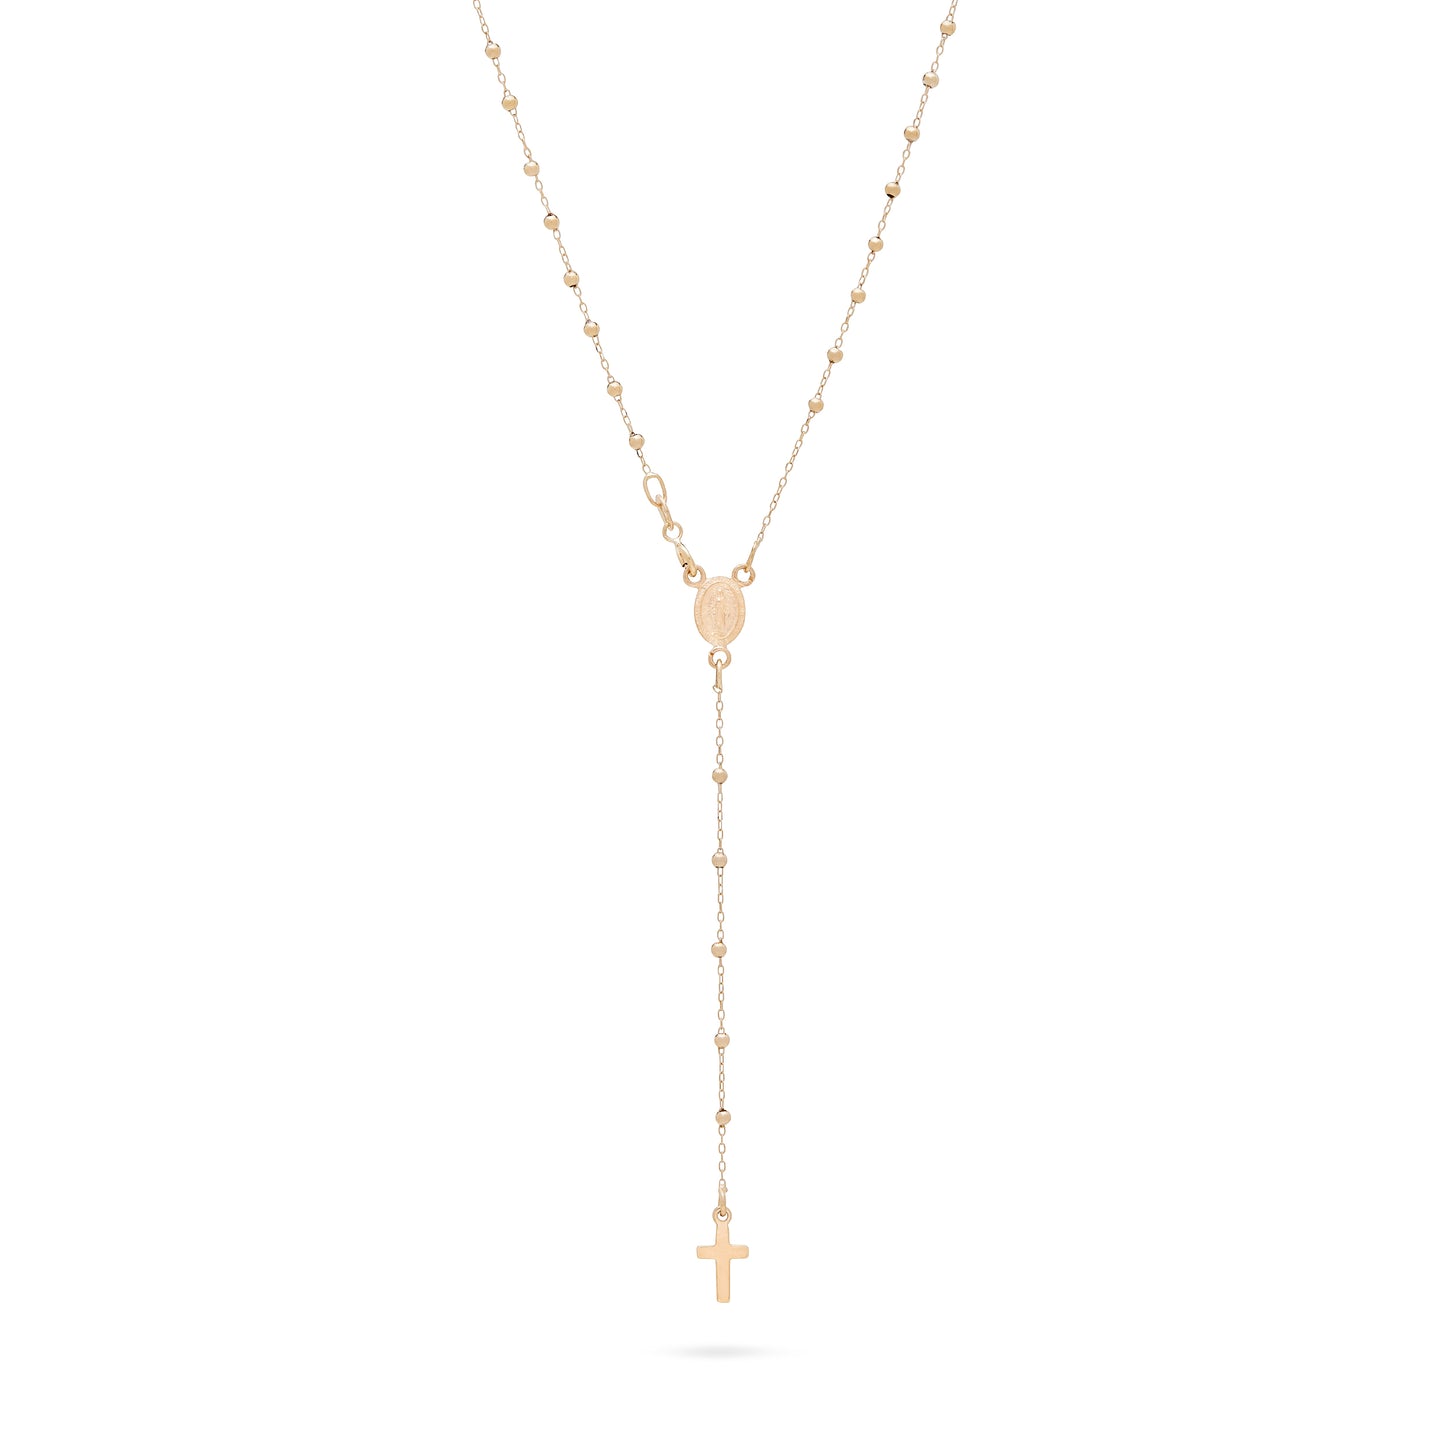 FINE YELLOW GOLD ROSARY